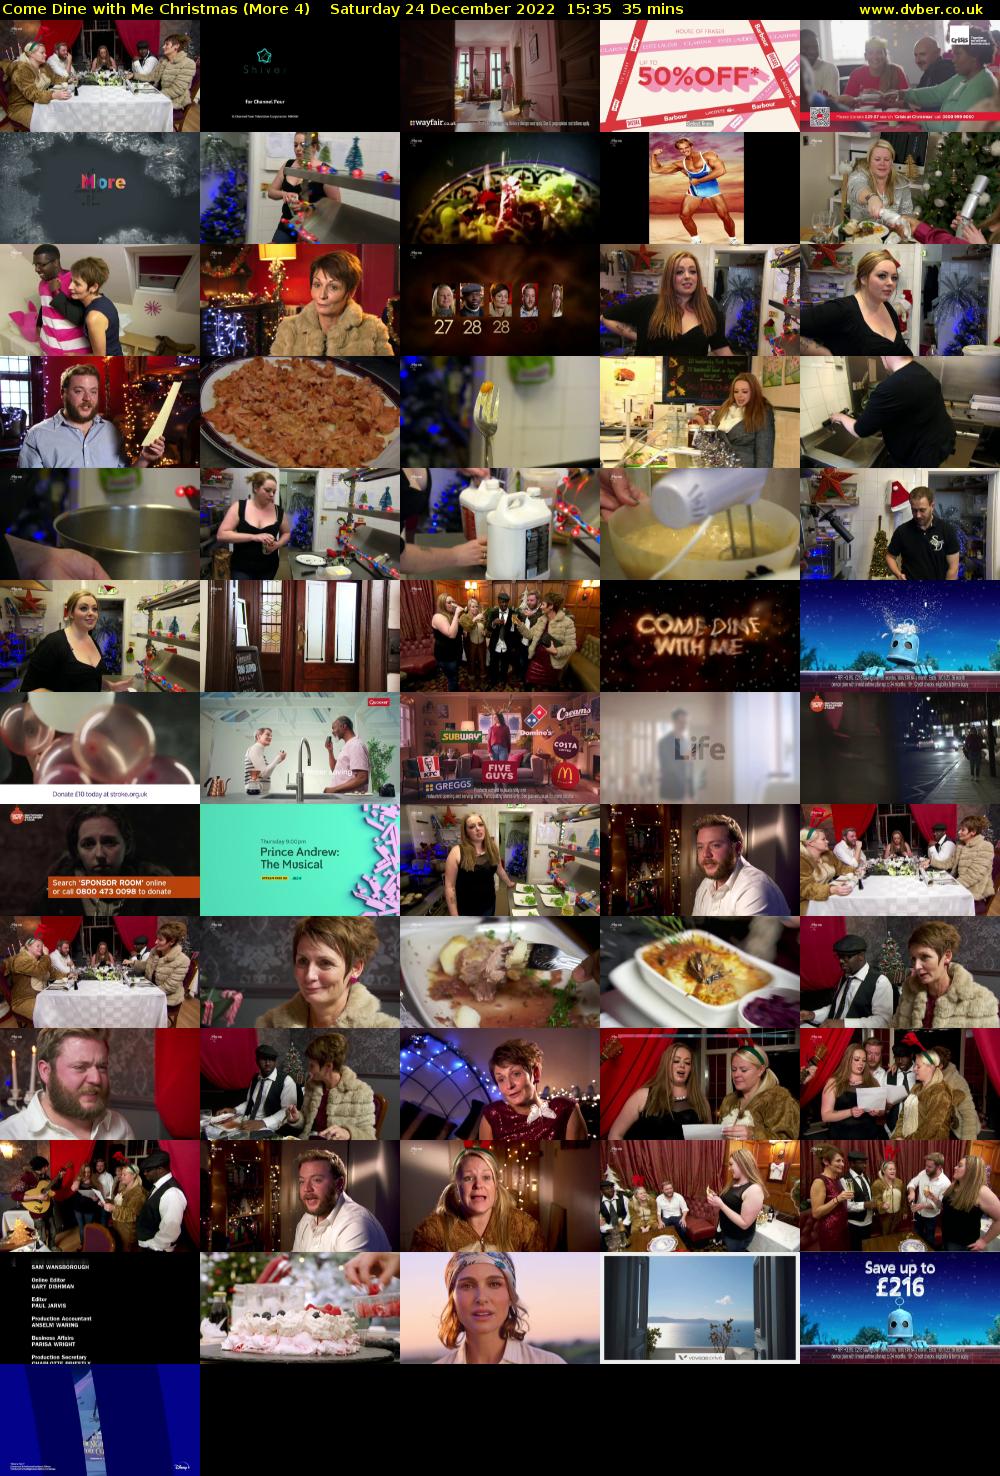 Come Dine with Me Christmas (More 4) Saturday 24 December 2022 15:35 - 16:10